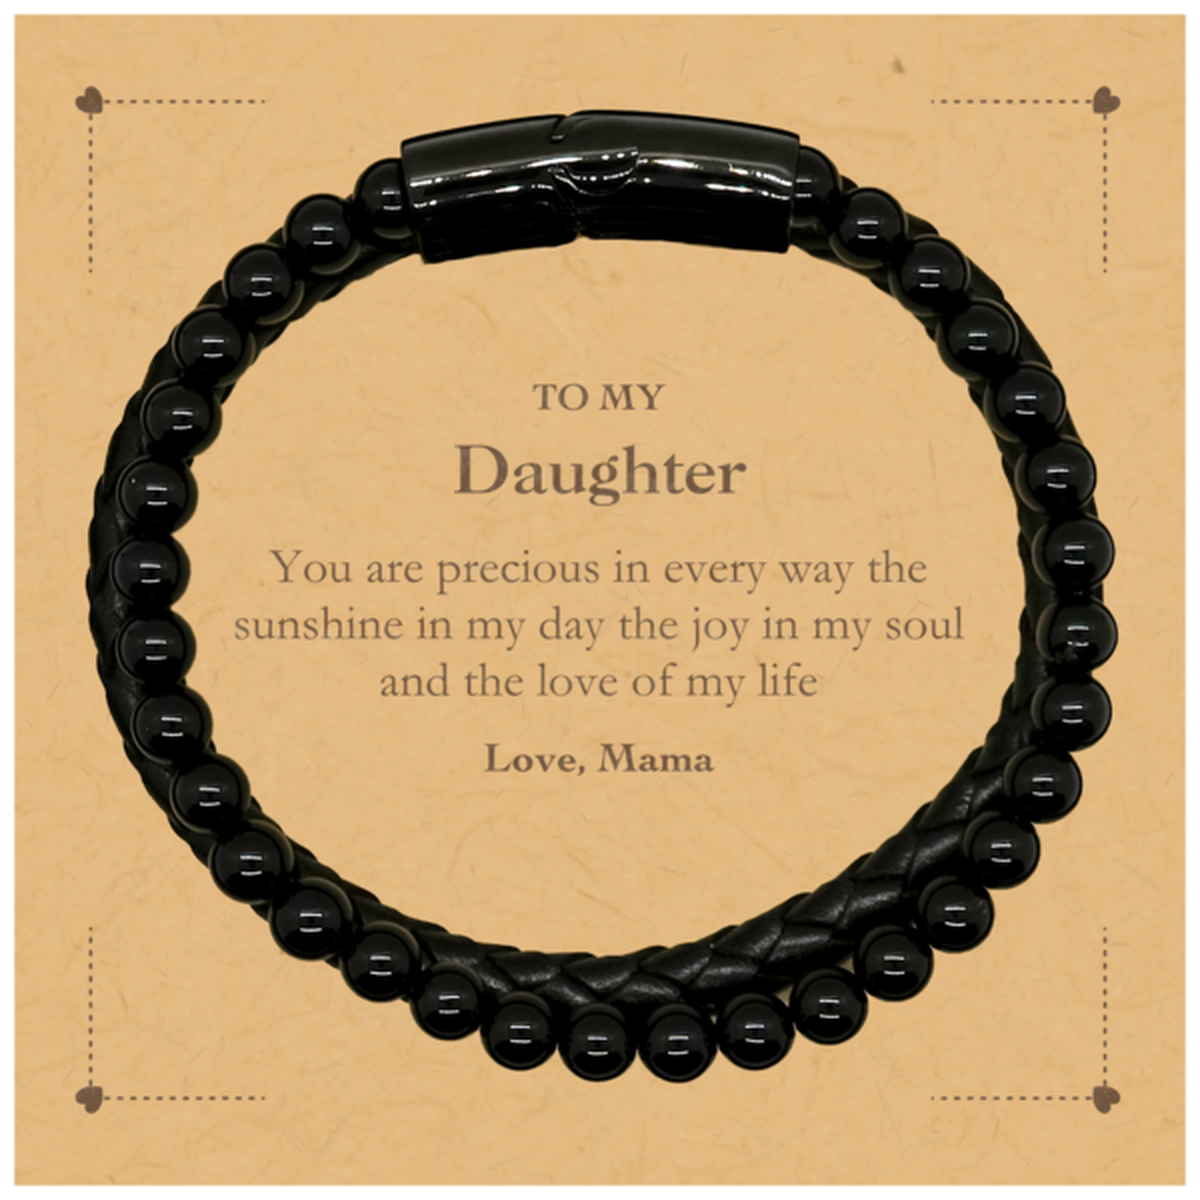 Graduation Gifts for Daughter Stone Leather Bracelets Present from Mama, Christmas Daughter Birthday Gifts Daughter You are precious in every way the sunshine in my day. Love, Mama